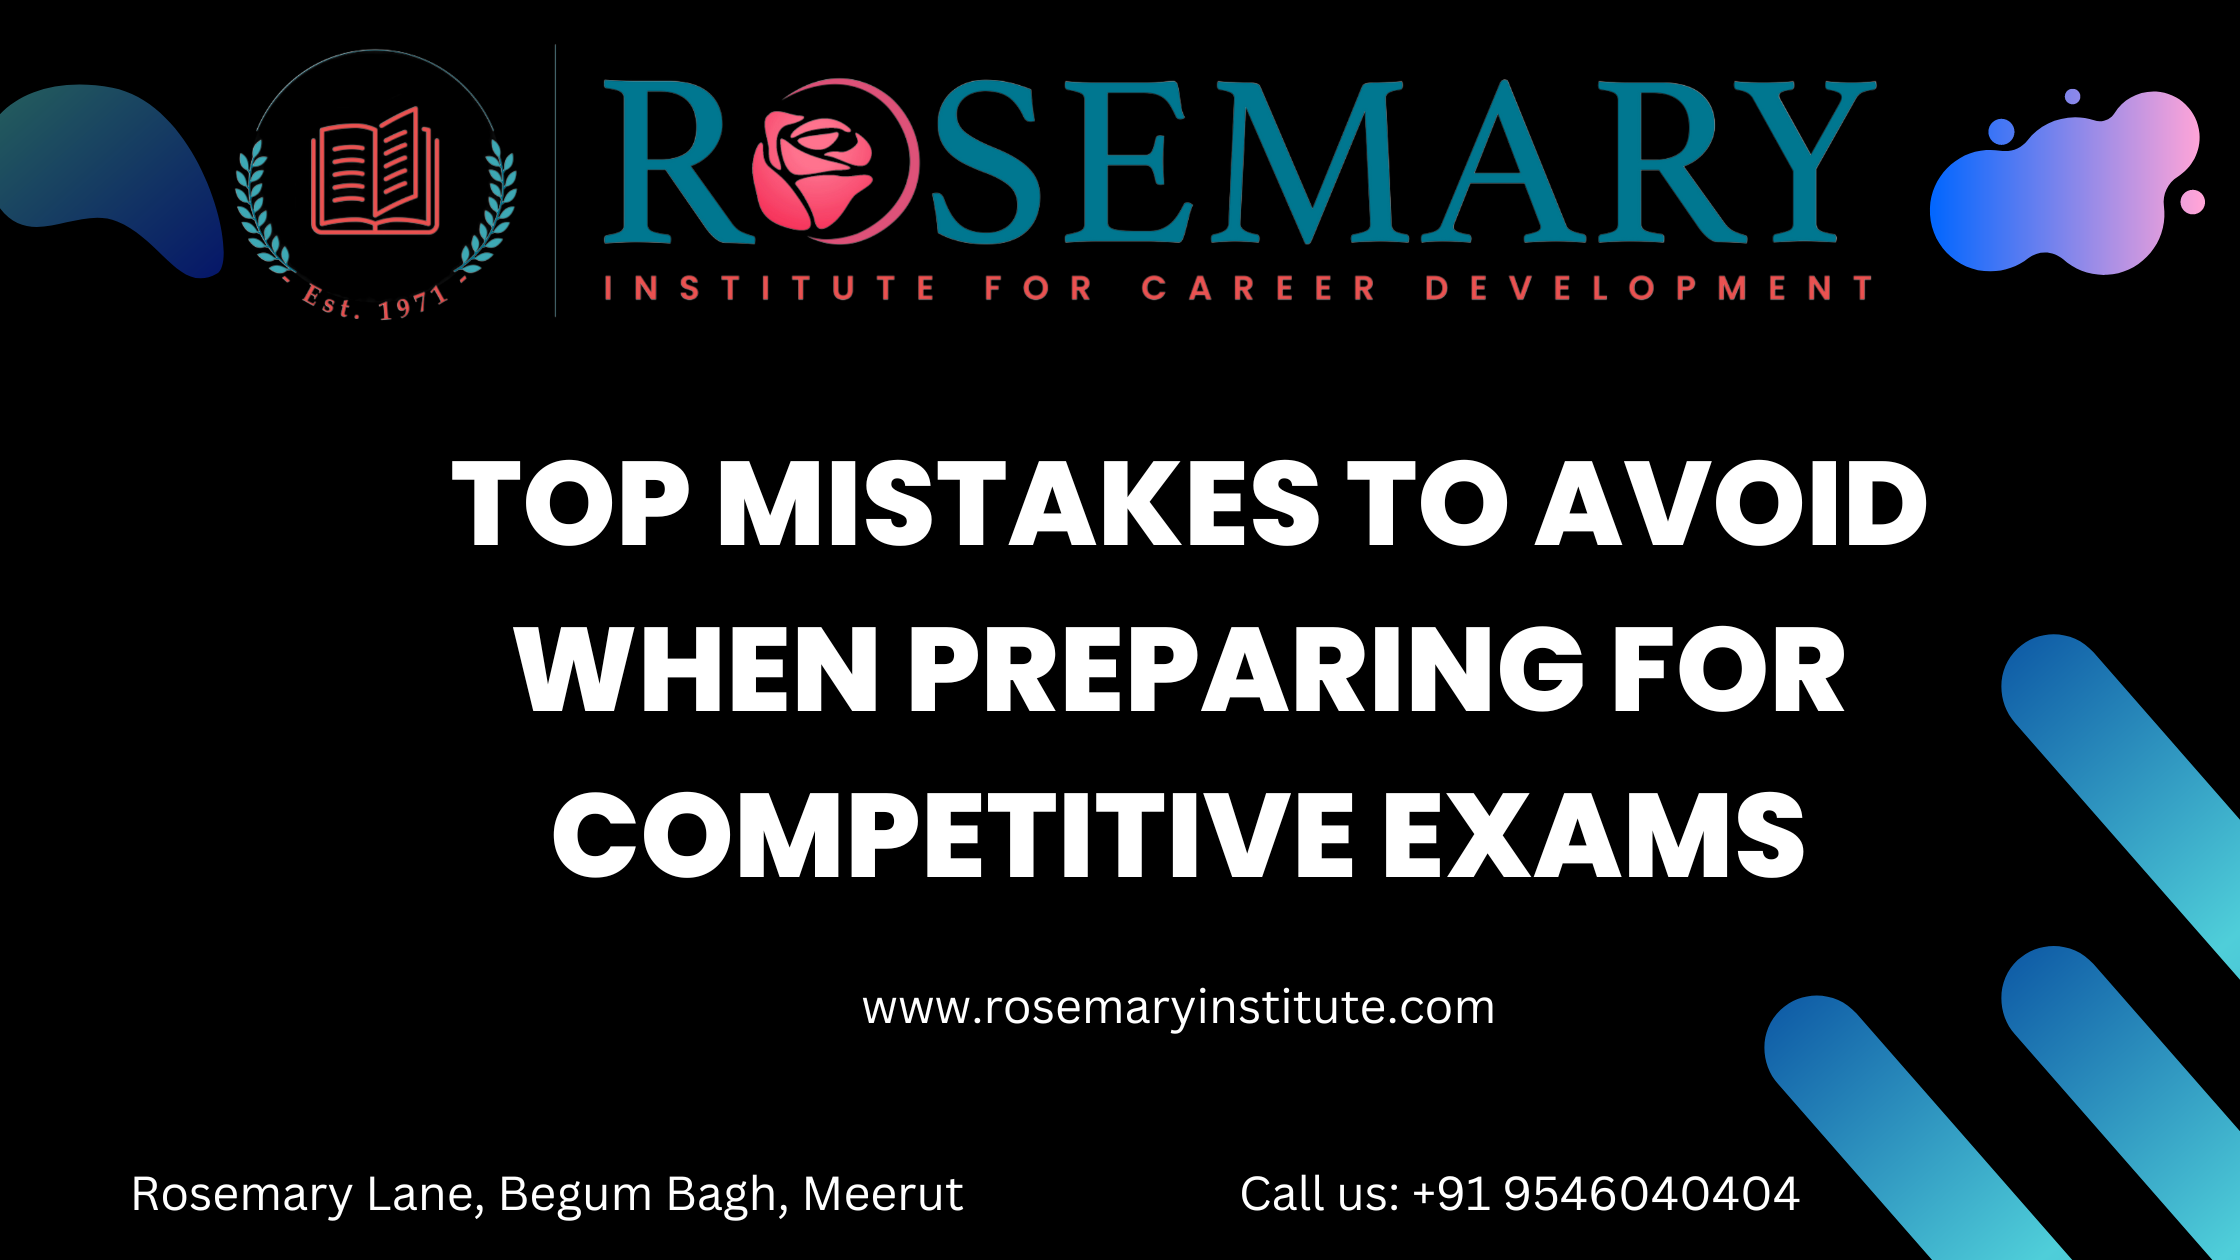 The Road to Exam Success: Top Mistakes to Avoid When Preparing for Competitive Exams